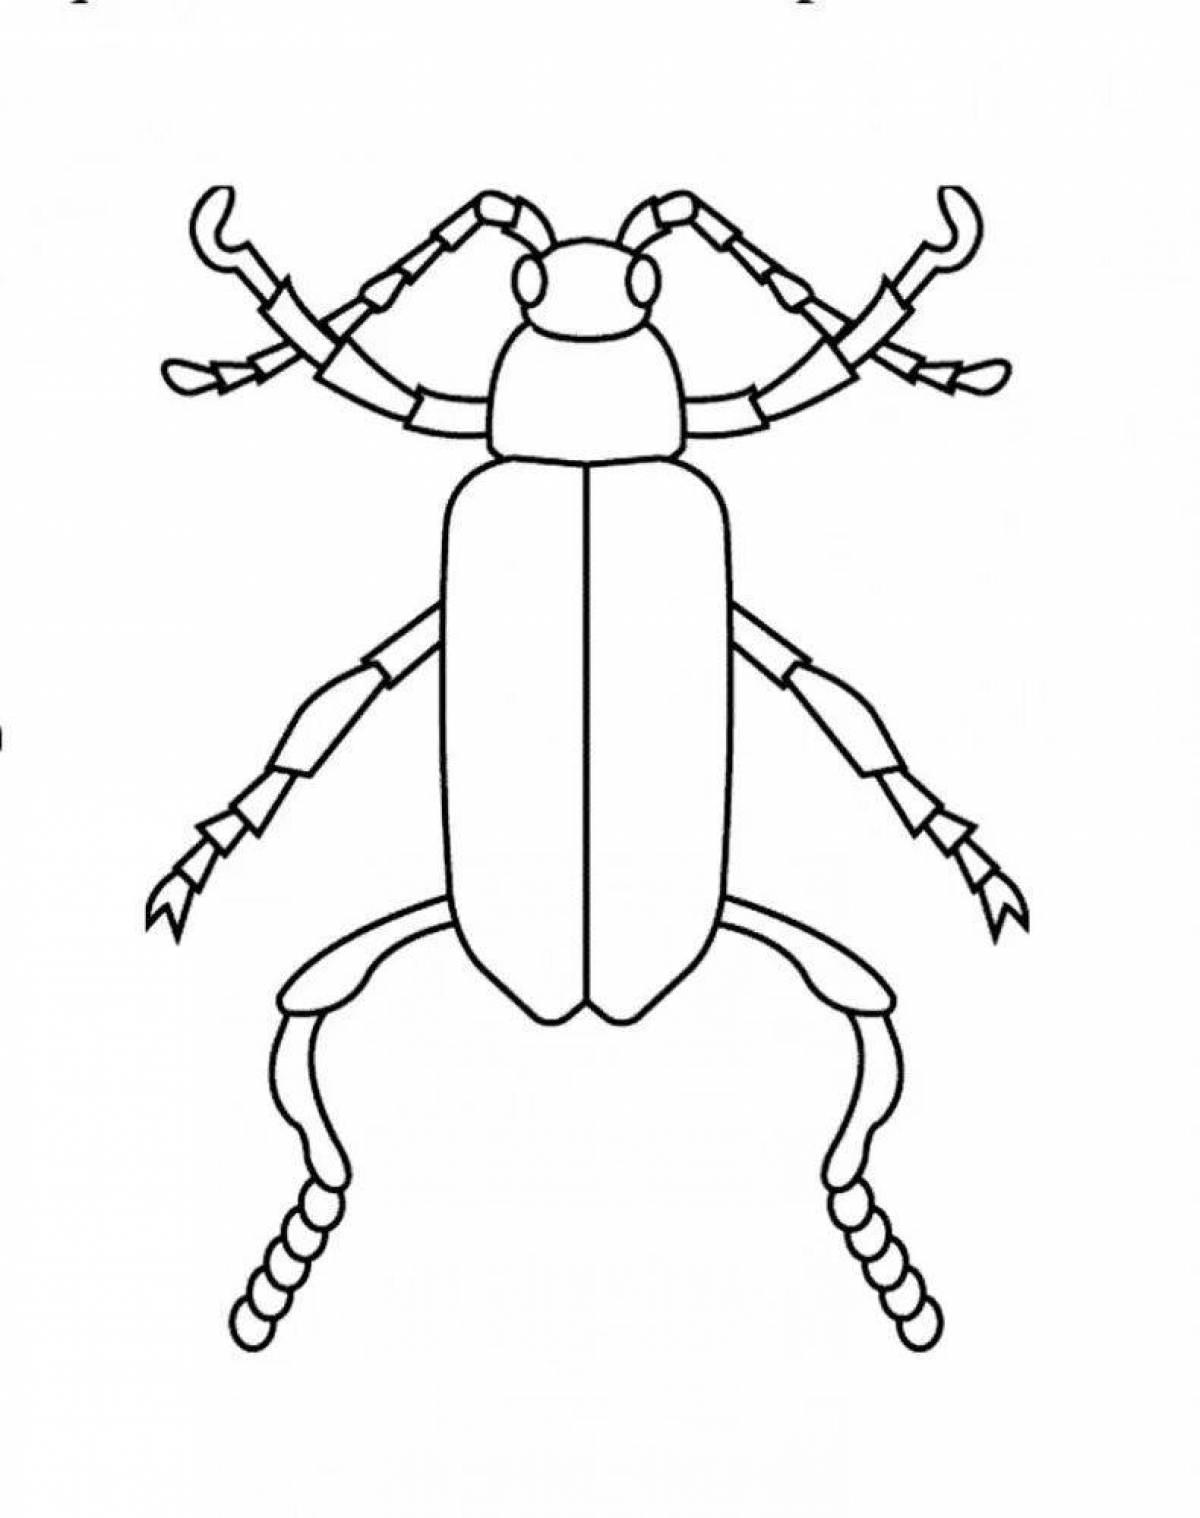 Cool bugs coloring book